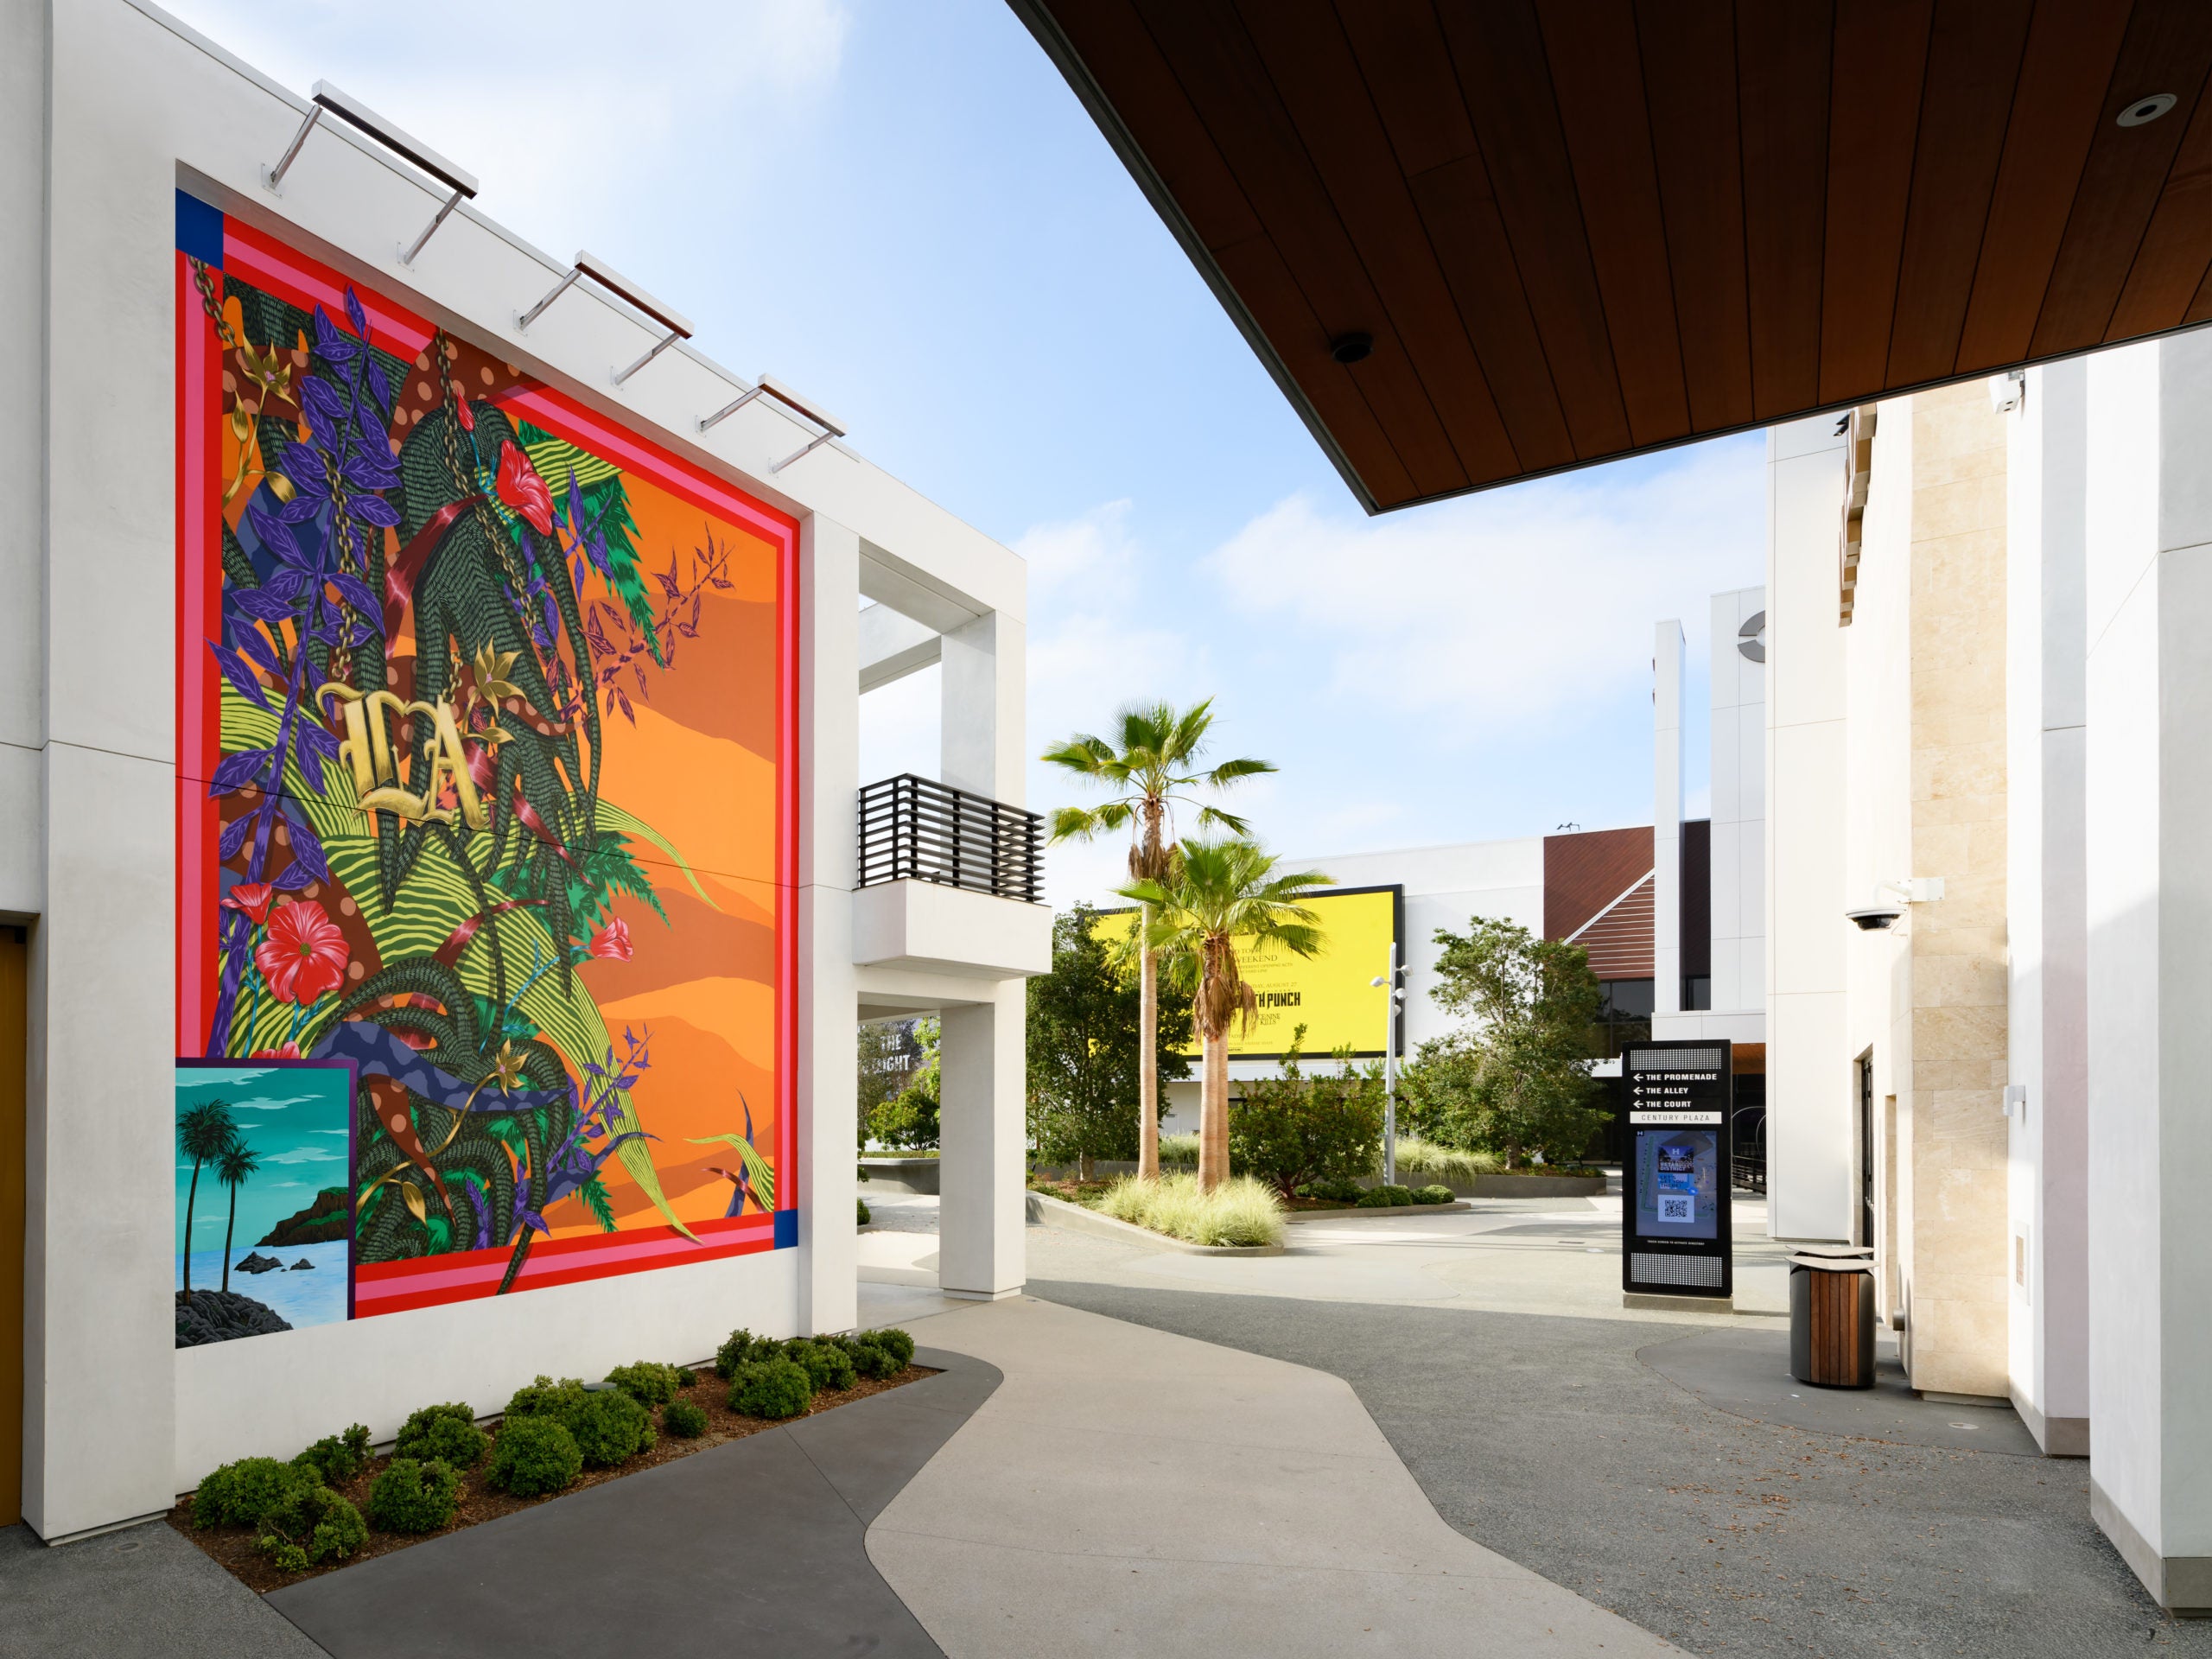 More Info for Hollywood Park Adds Murals and Sculptures in Newly Opened Retail Area as Part of its Art Program